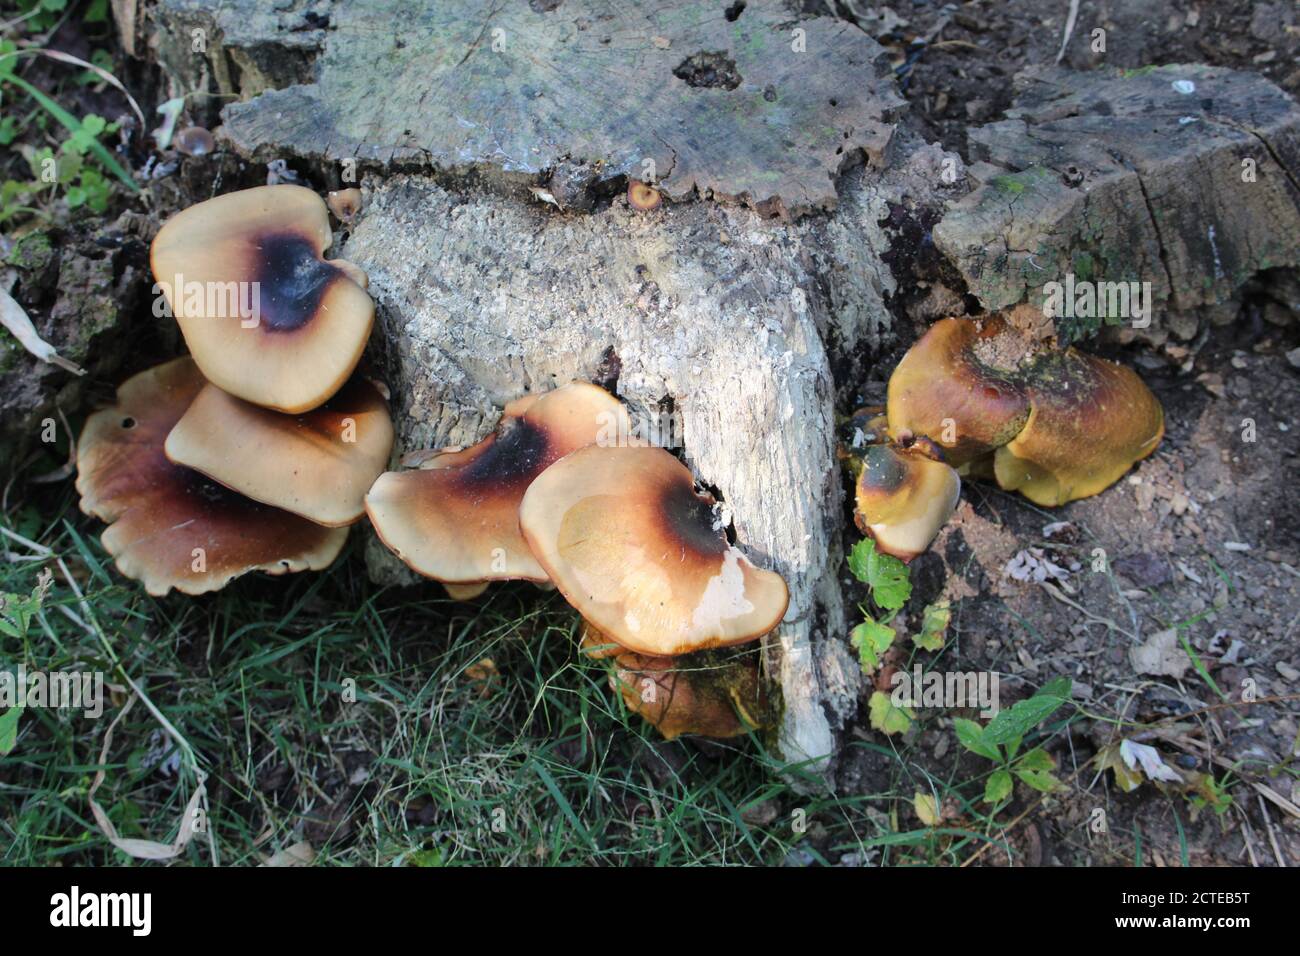 Black-footed polypore mushrooms on a tree trunk in a forest preserve in Niles, Illinois Stock Photo